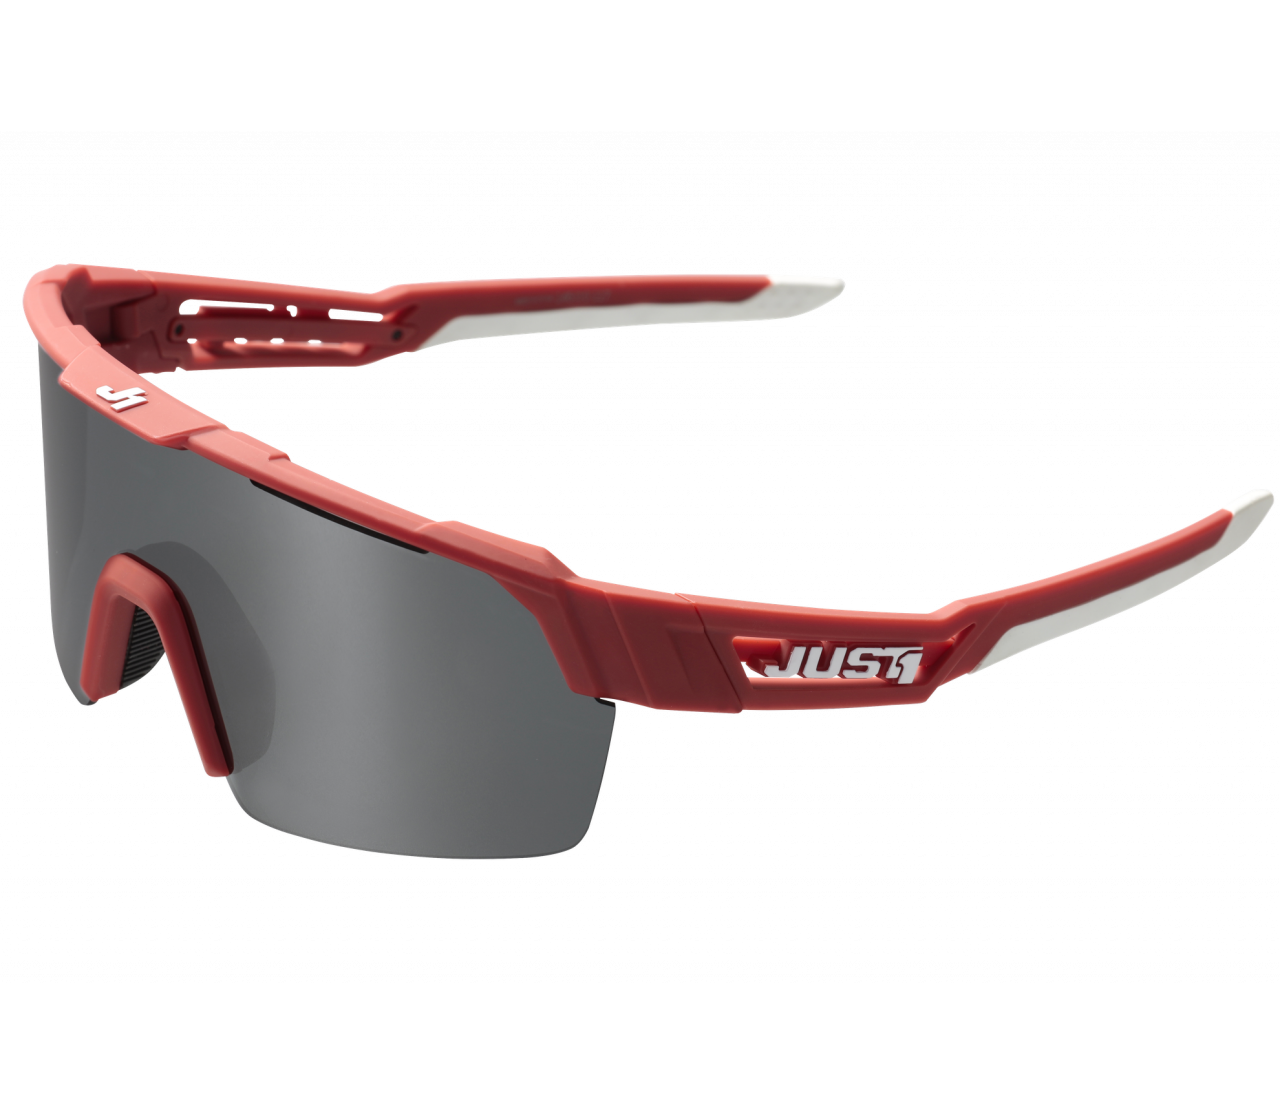 JUST1 SNIPER URBAN DARK RED-WHITE with silver mirror lens